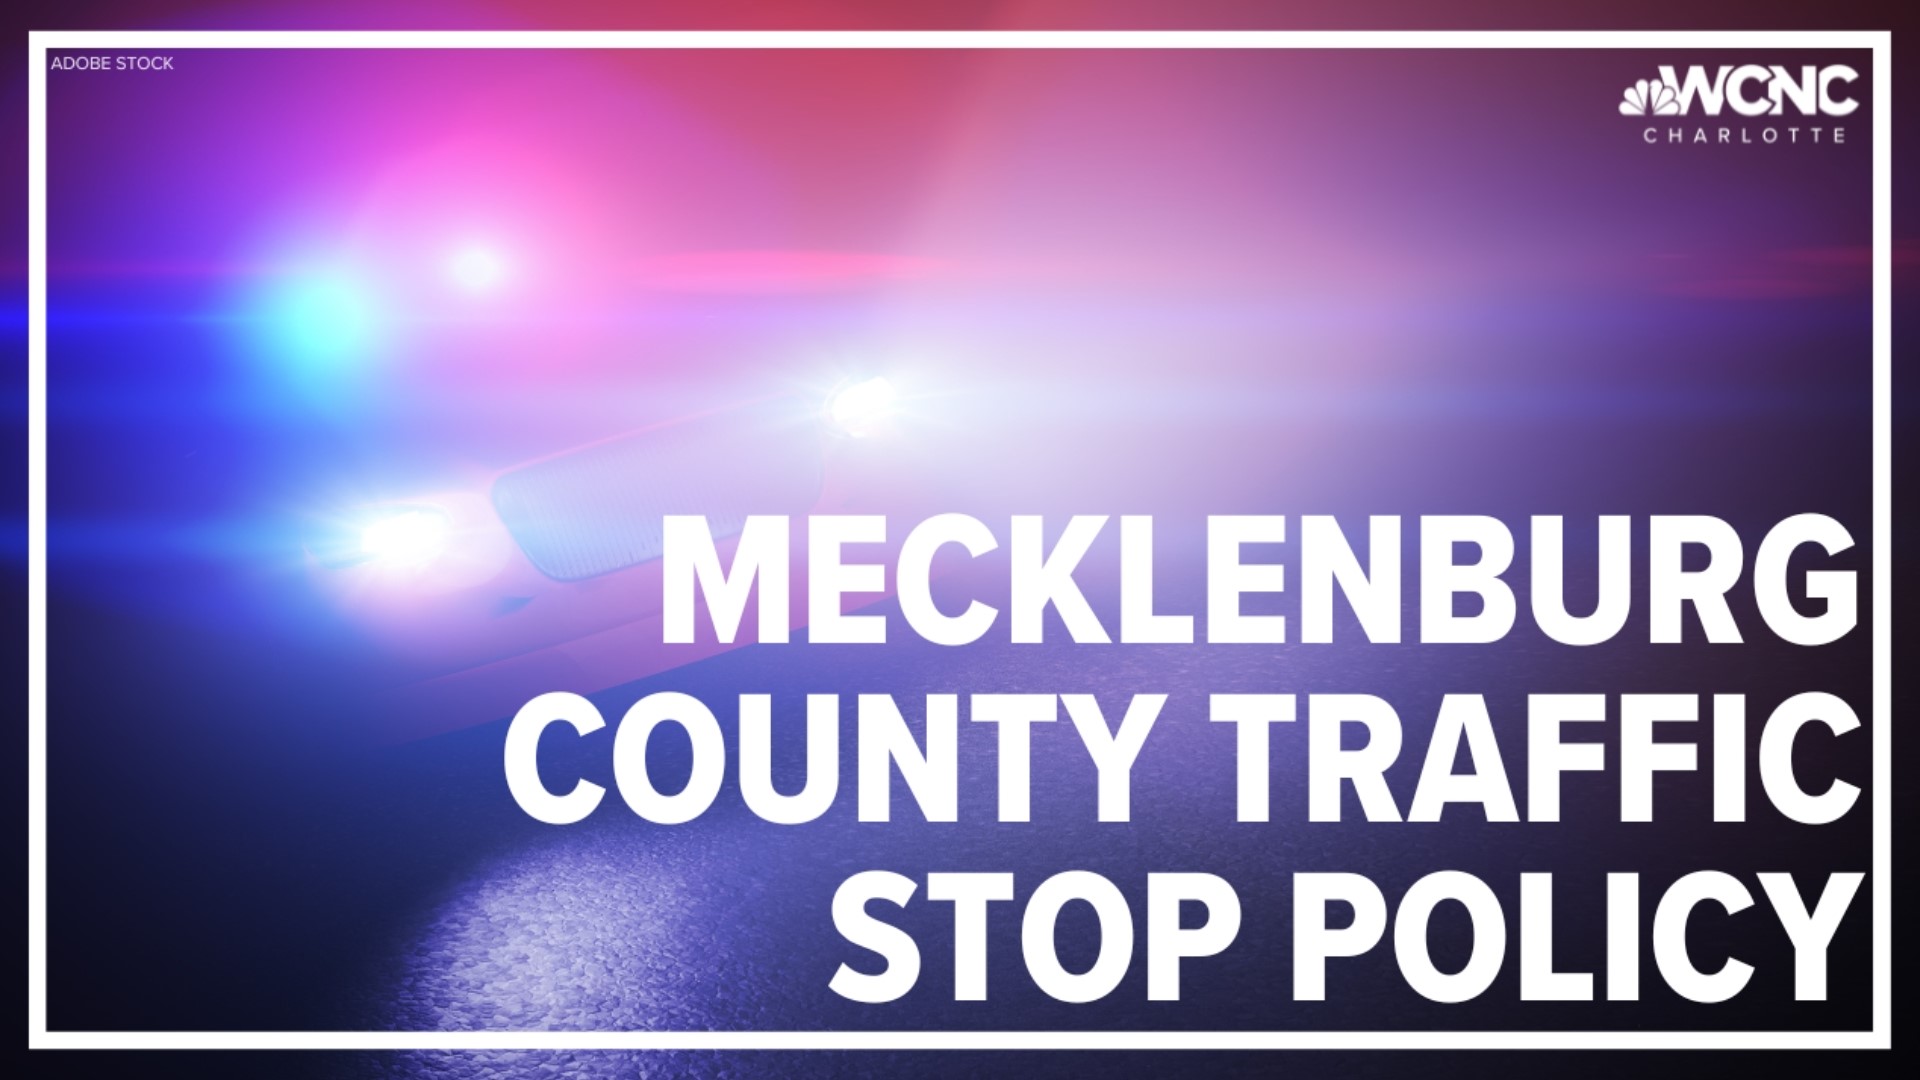 The Mecklenburg County Sheriff's Office has ended traffic stops for non-moving violations, such as driving on a revoked license, window tint or a broken taillight.